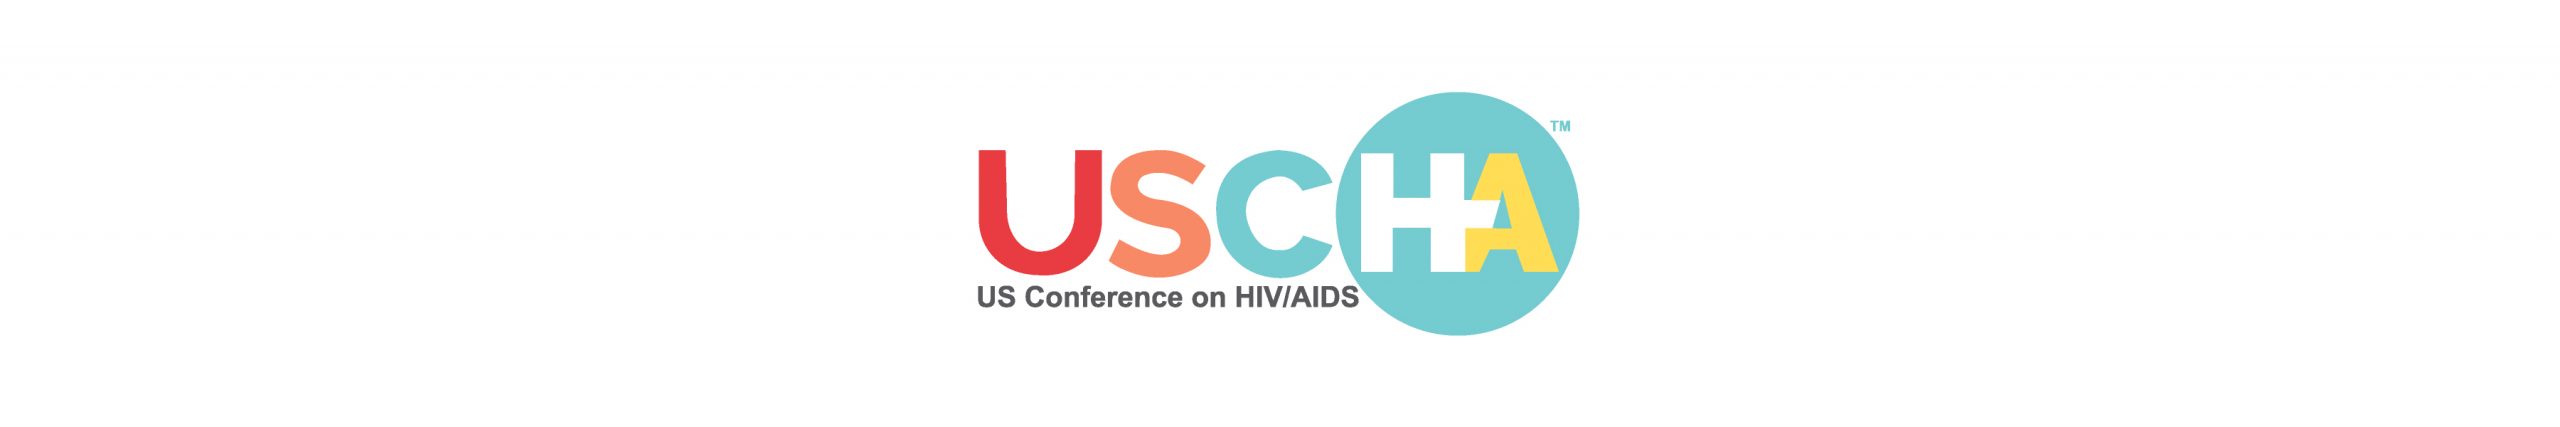 US Conference on HIV/AIDS Goes Virtual